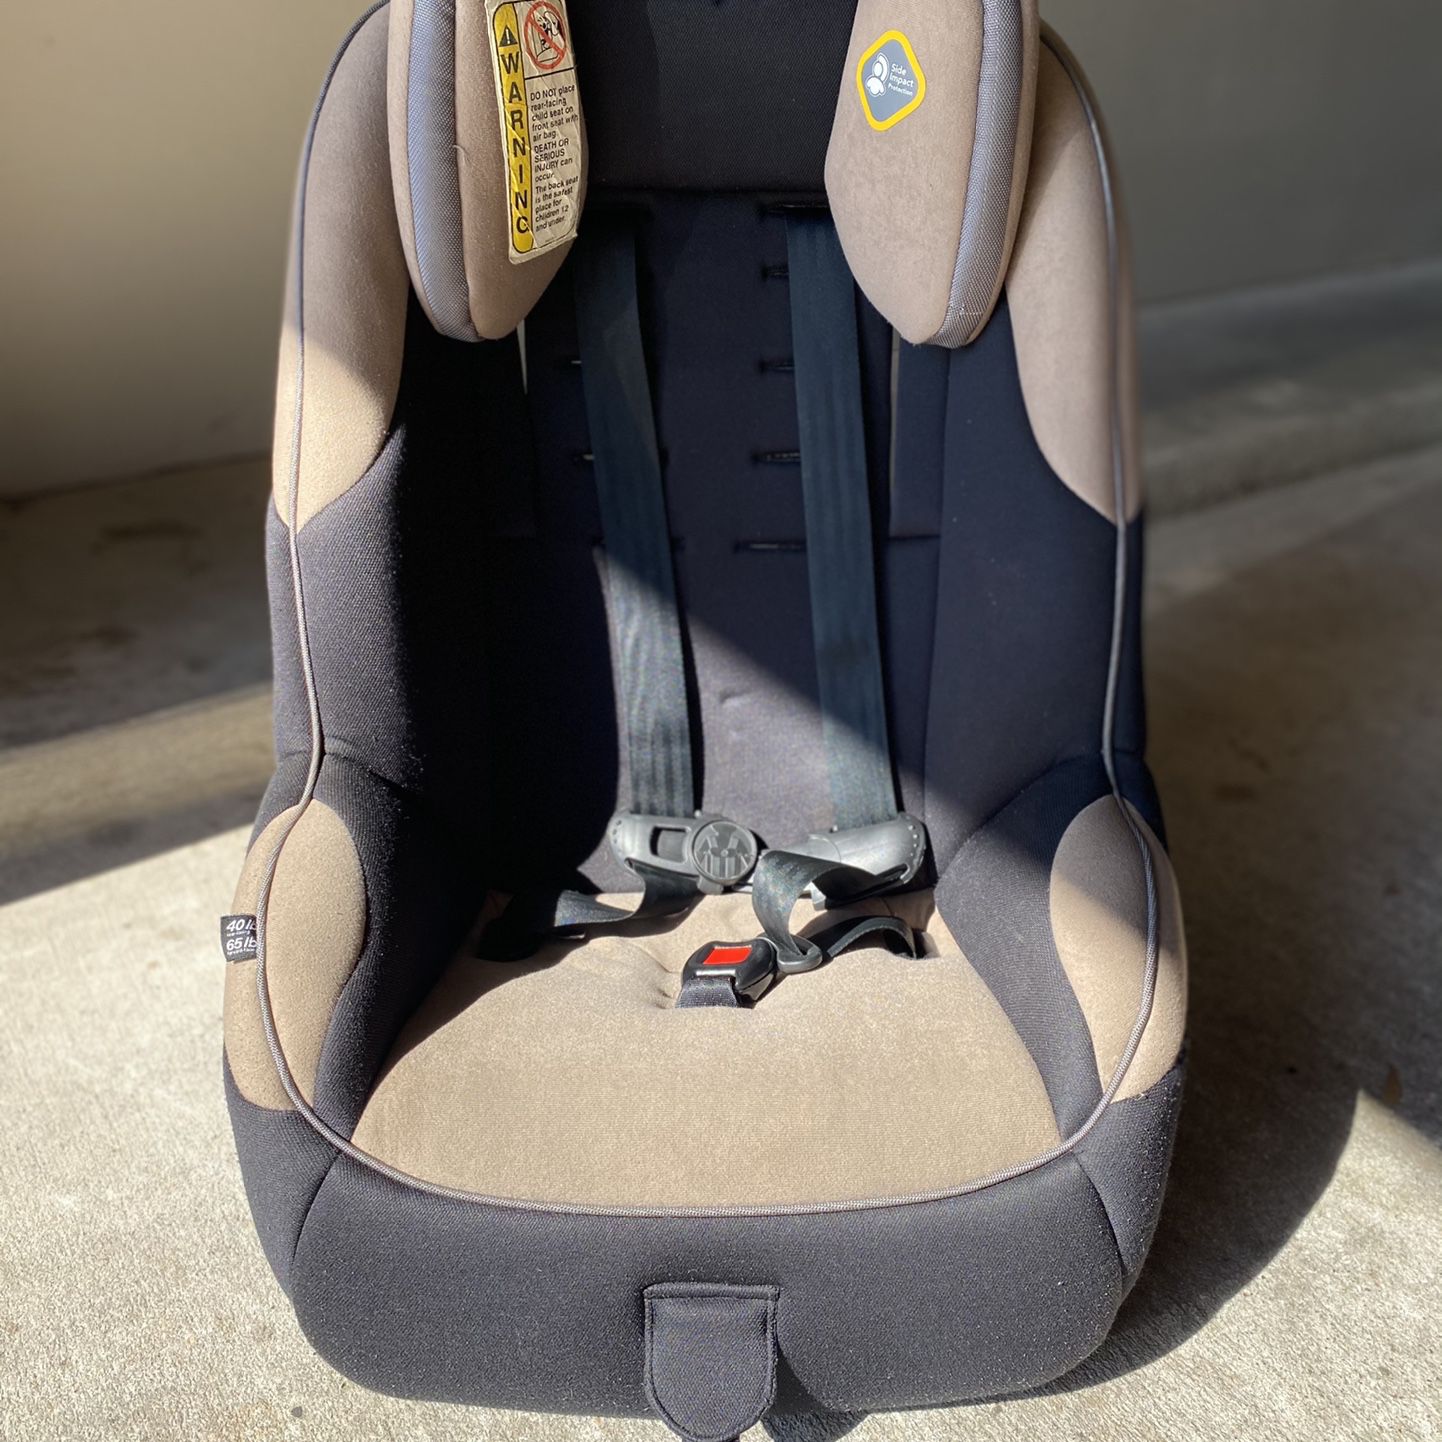 Safety 1st Car seat(like new)